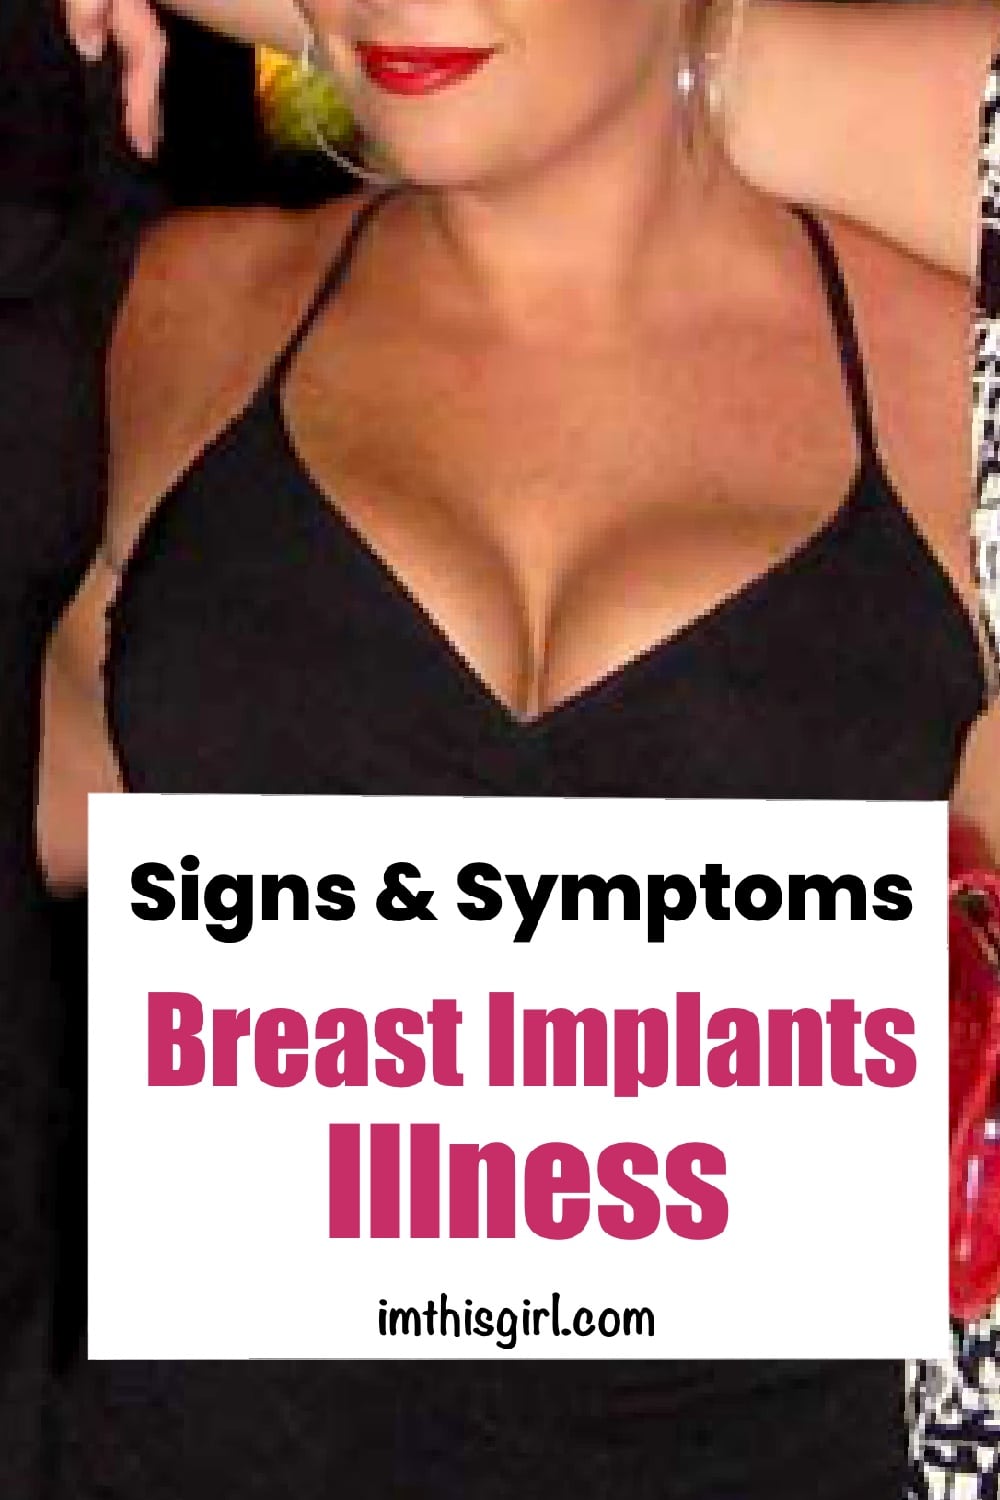 Signs and Symptoms of breast implant illness